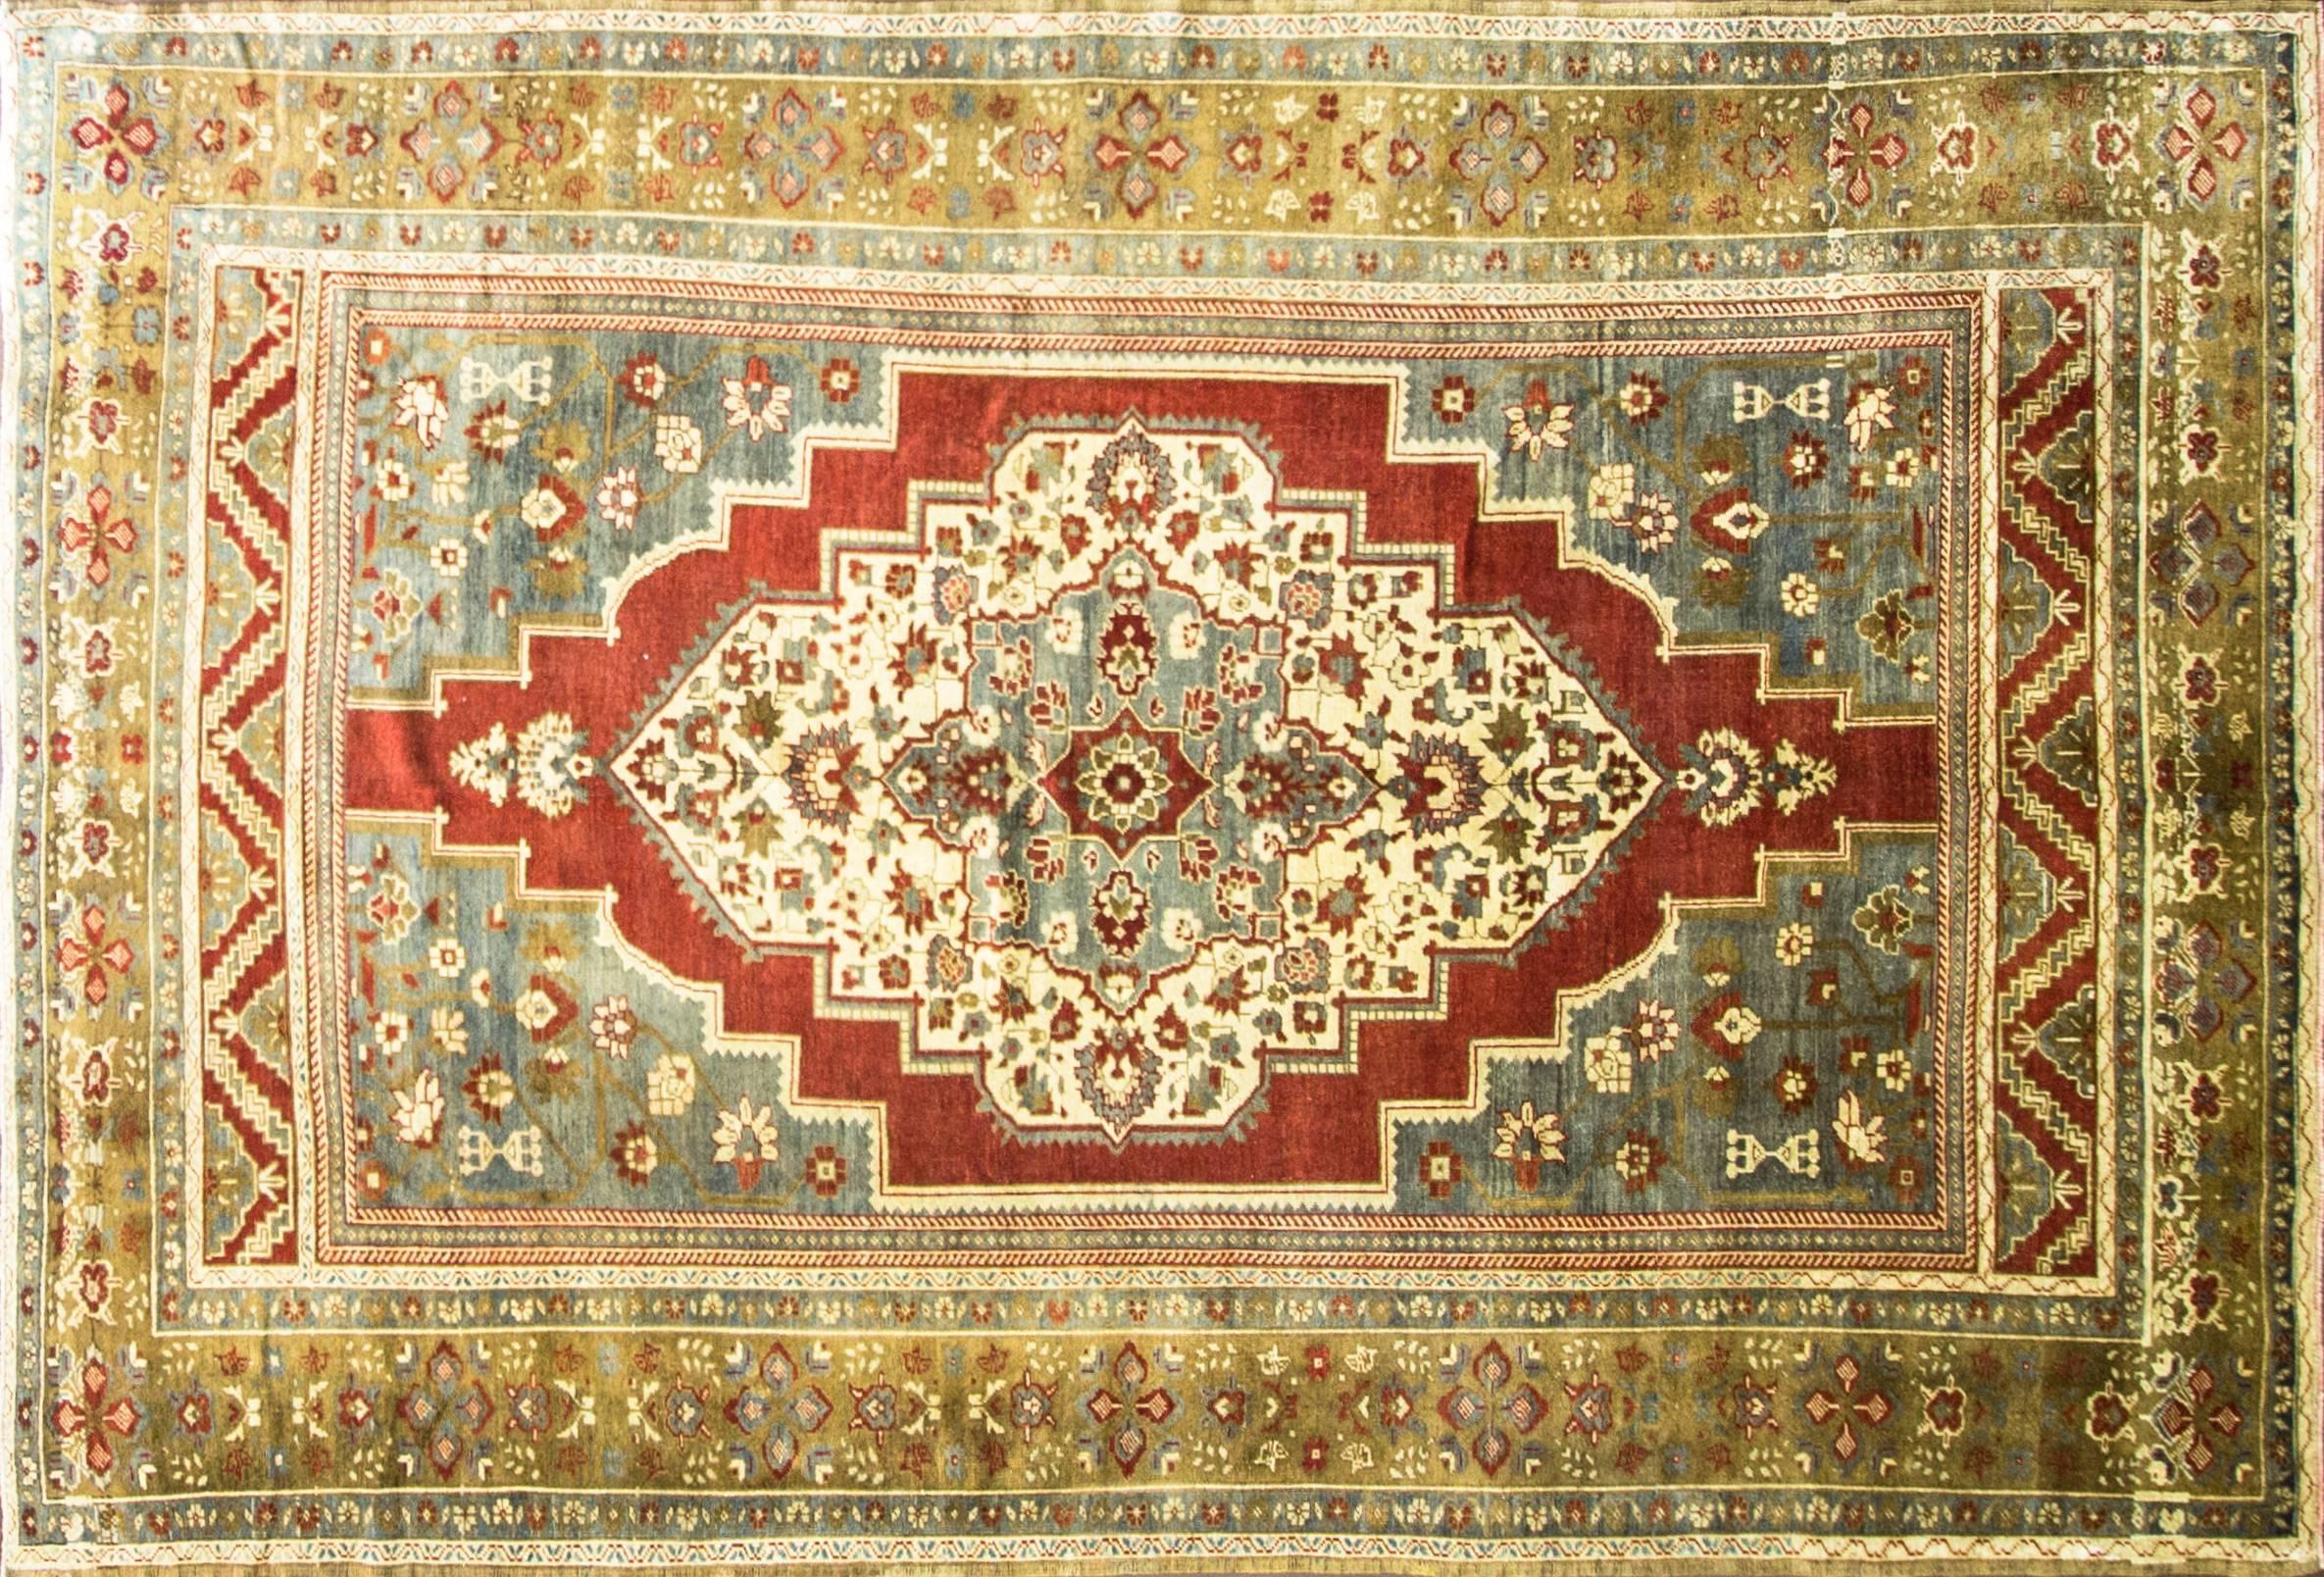 Fine weave and wool quality.
Ushak rugs have been in production since the 15th century with superb wools and natural dyes. Unlike other Turkish rugs, Ushak rugs influenced after Persian rugs and the woven with Ghiordies knots and all double